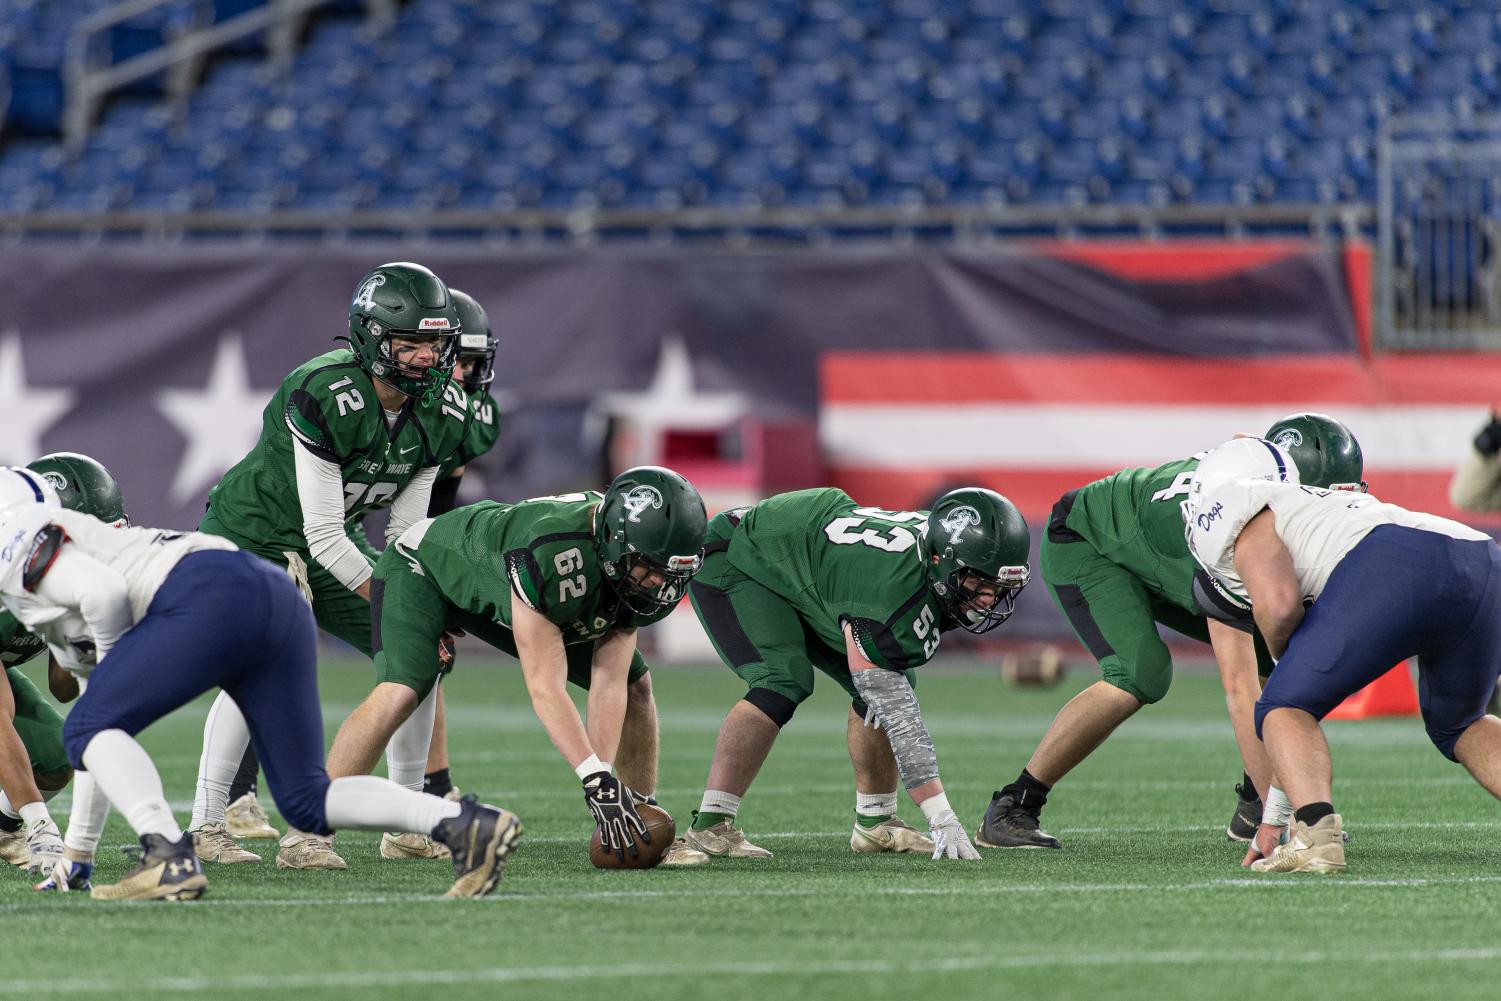 AHS football faced Rockland in the Div. 6 Super Bowl